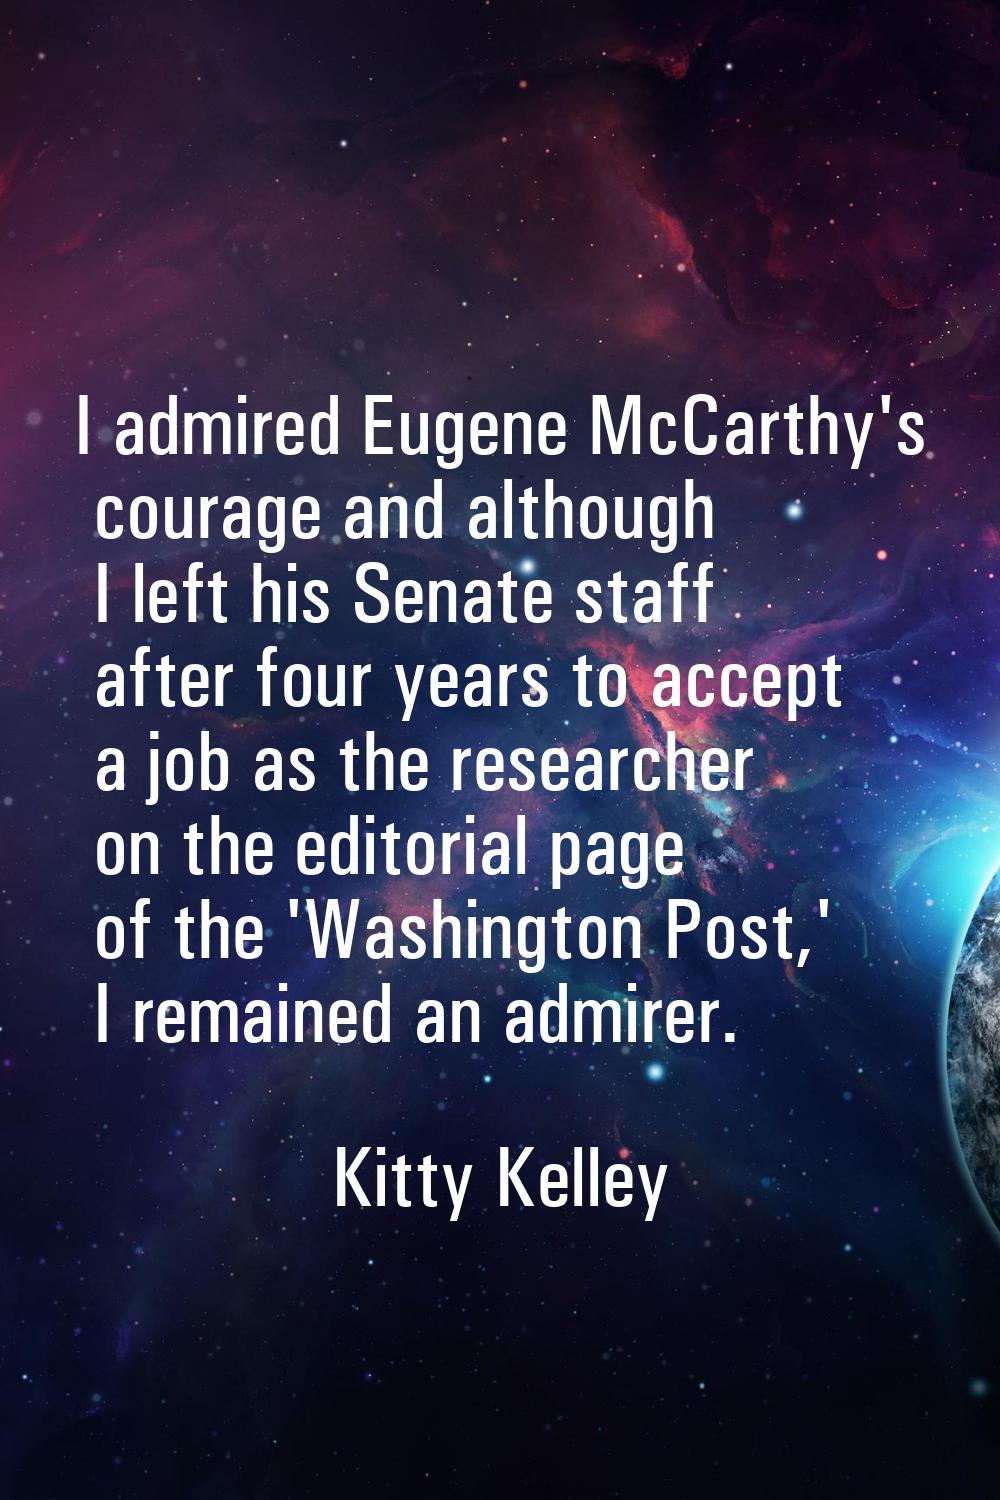 I admired Eugene McCarthy's courage and although I left his Senate staff after four years to accept